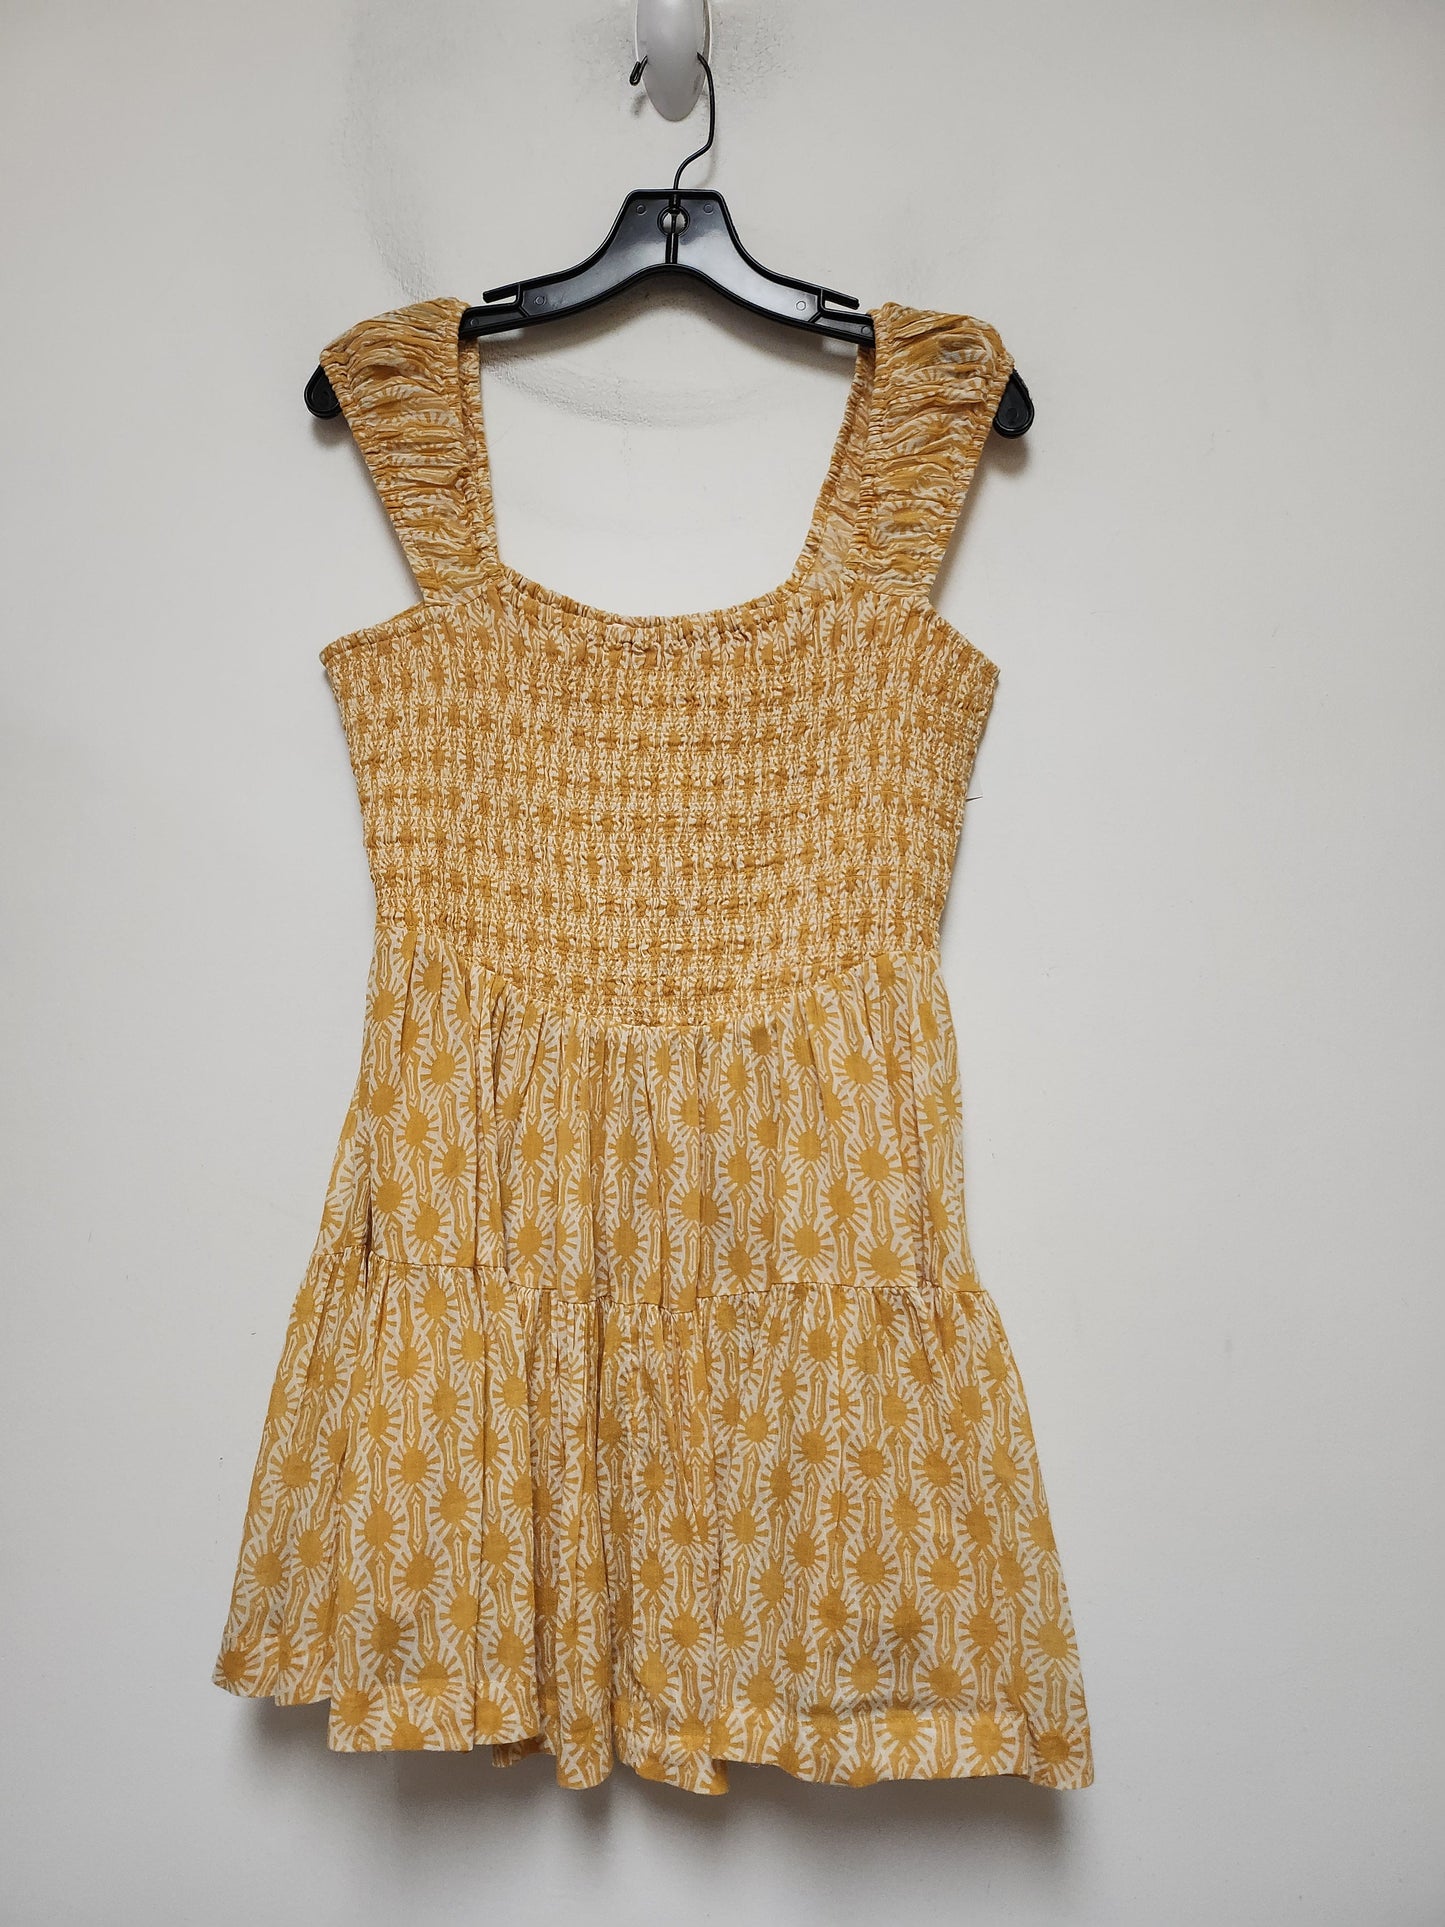 White & Yellow Dress Casual Short Free People, Size S